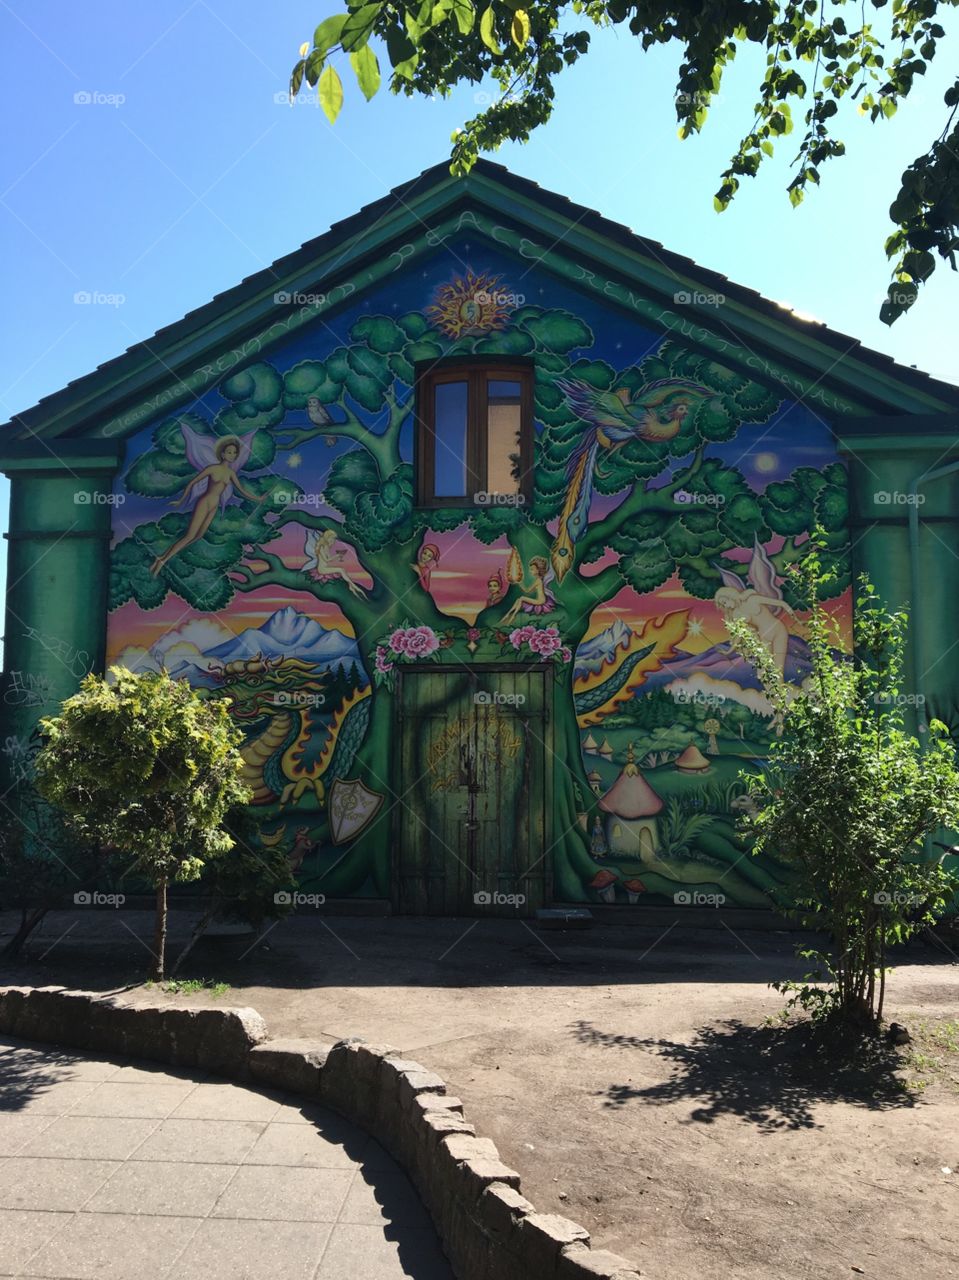 Artwork on a building while entering the freetown of Christiania in Copenhagen, Denmark. Summer 2016. 